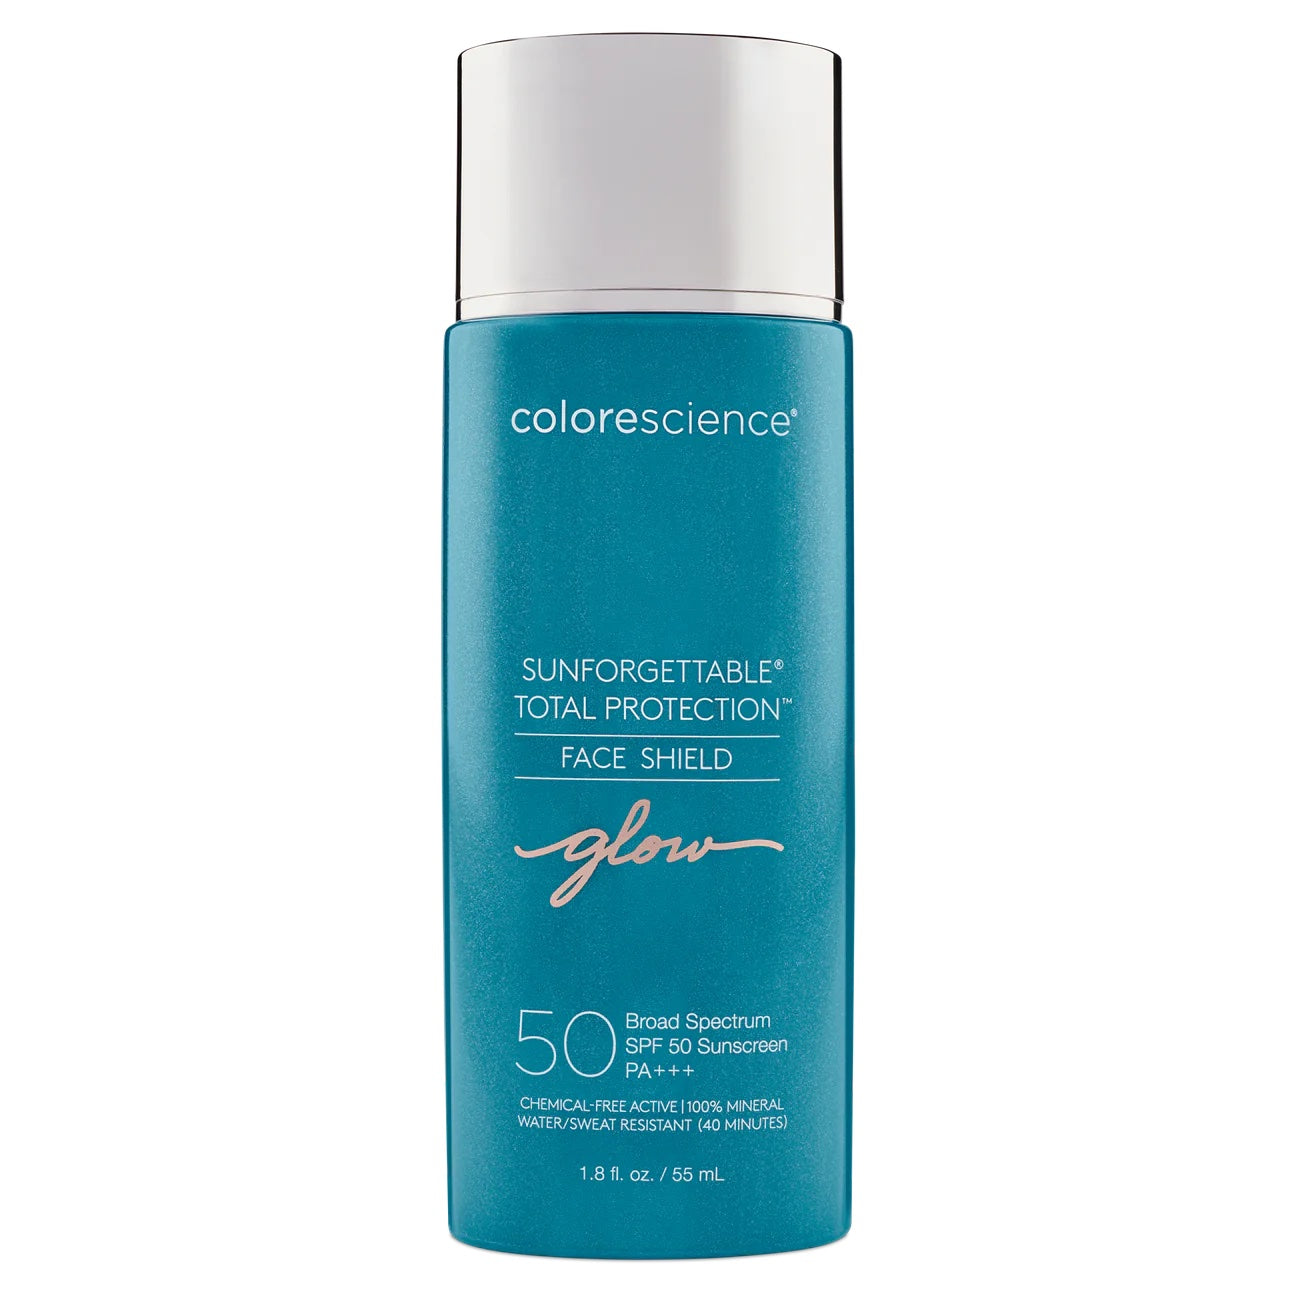 Colorescience Sunforgettable Total Protection Face Shield Glow